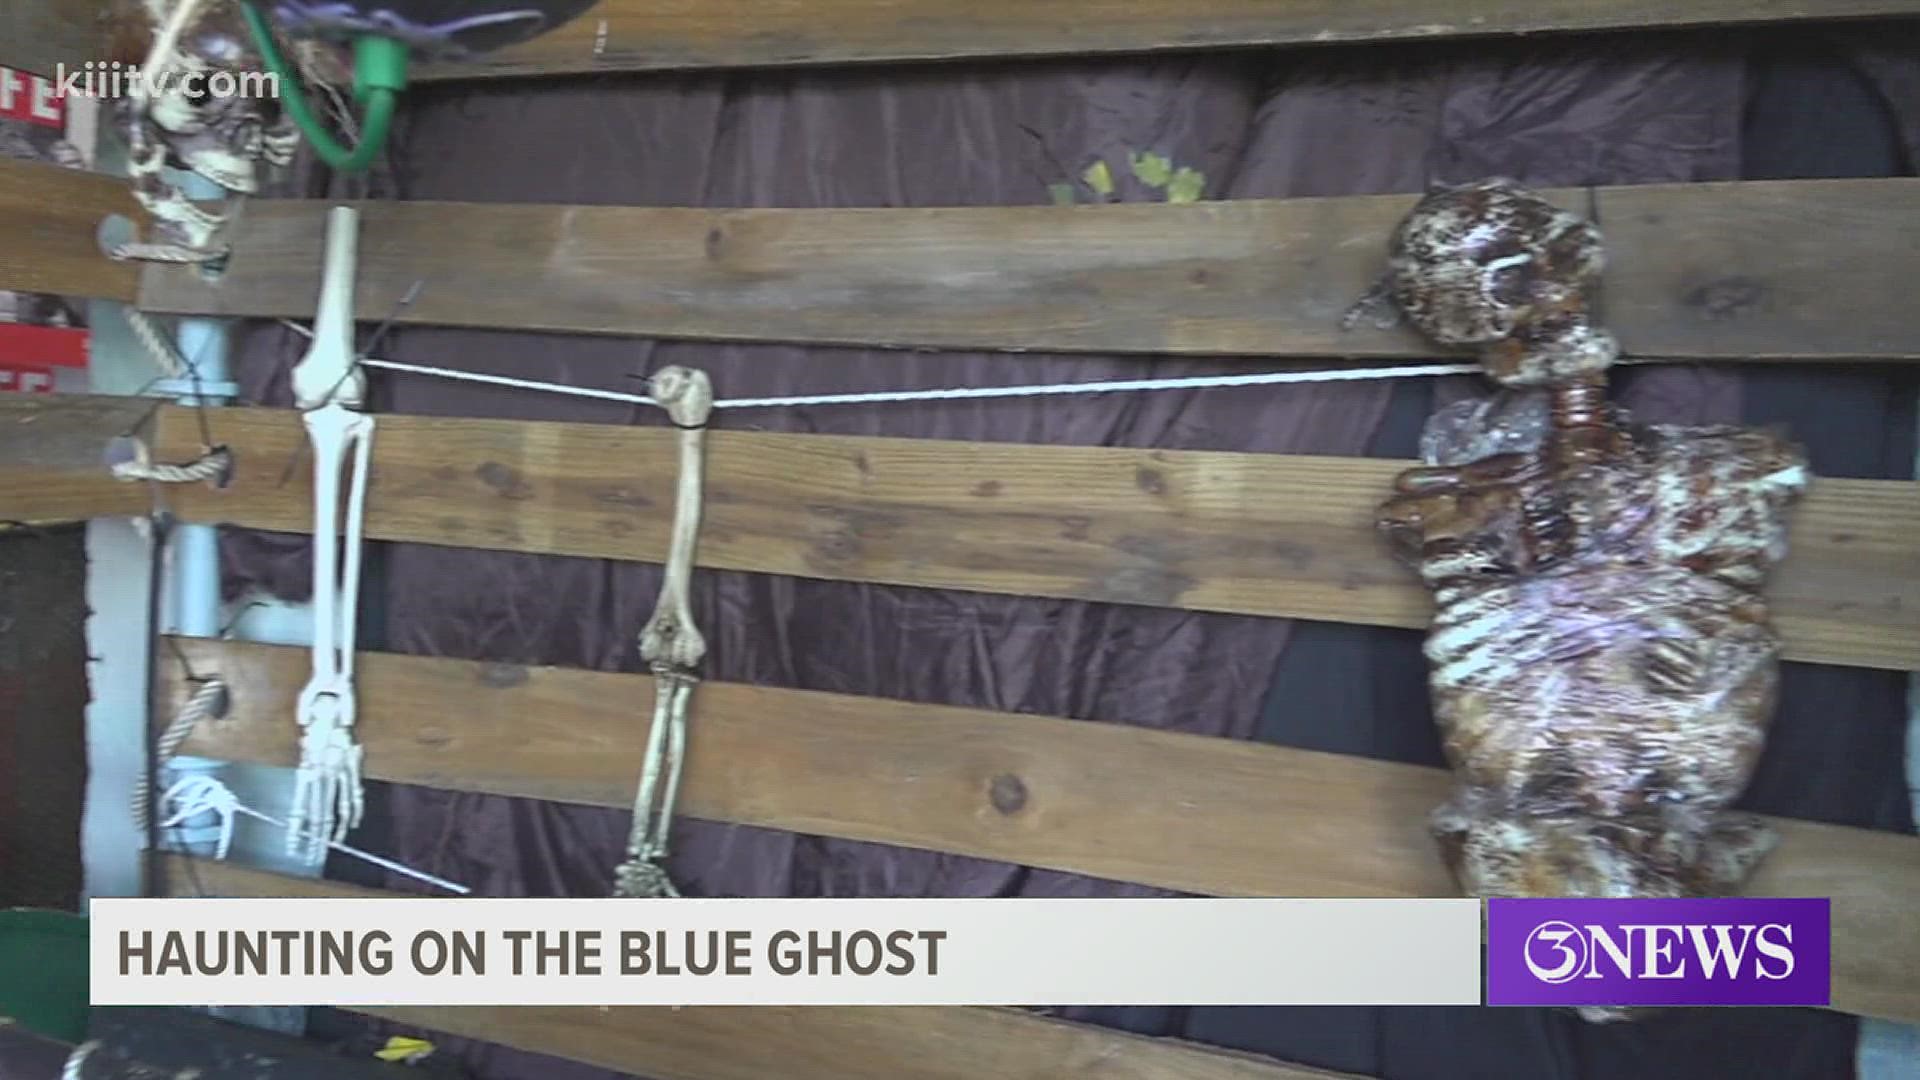 The Haunting on the Blue Ghost opens this weekend and runs until November 6. Furthermore, Banta said that the fear factor will help bring residents on board.